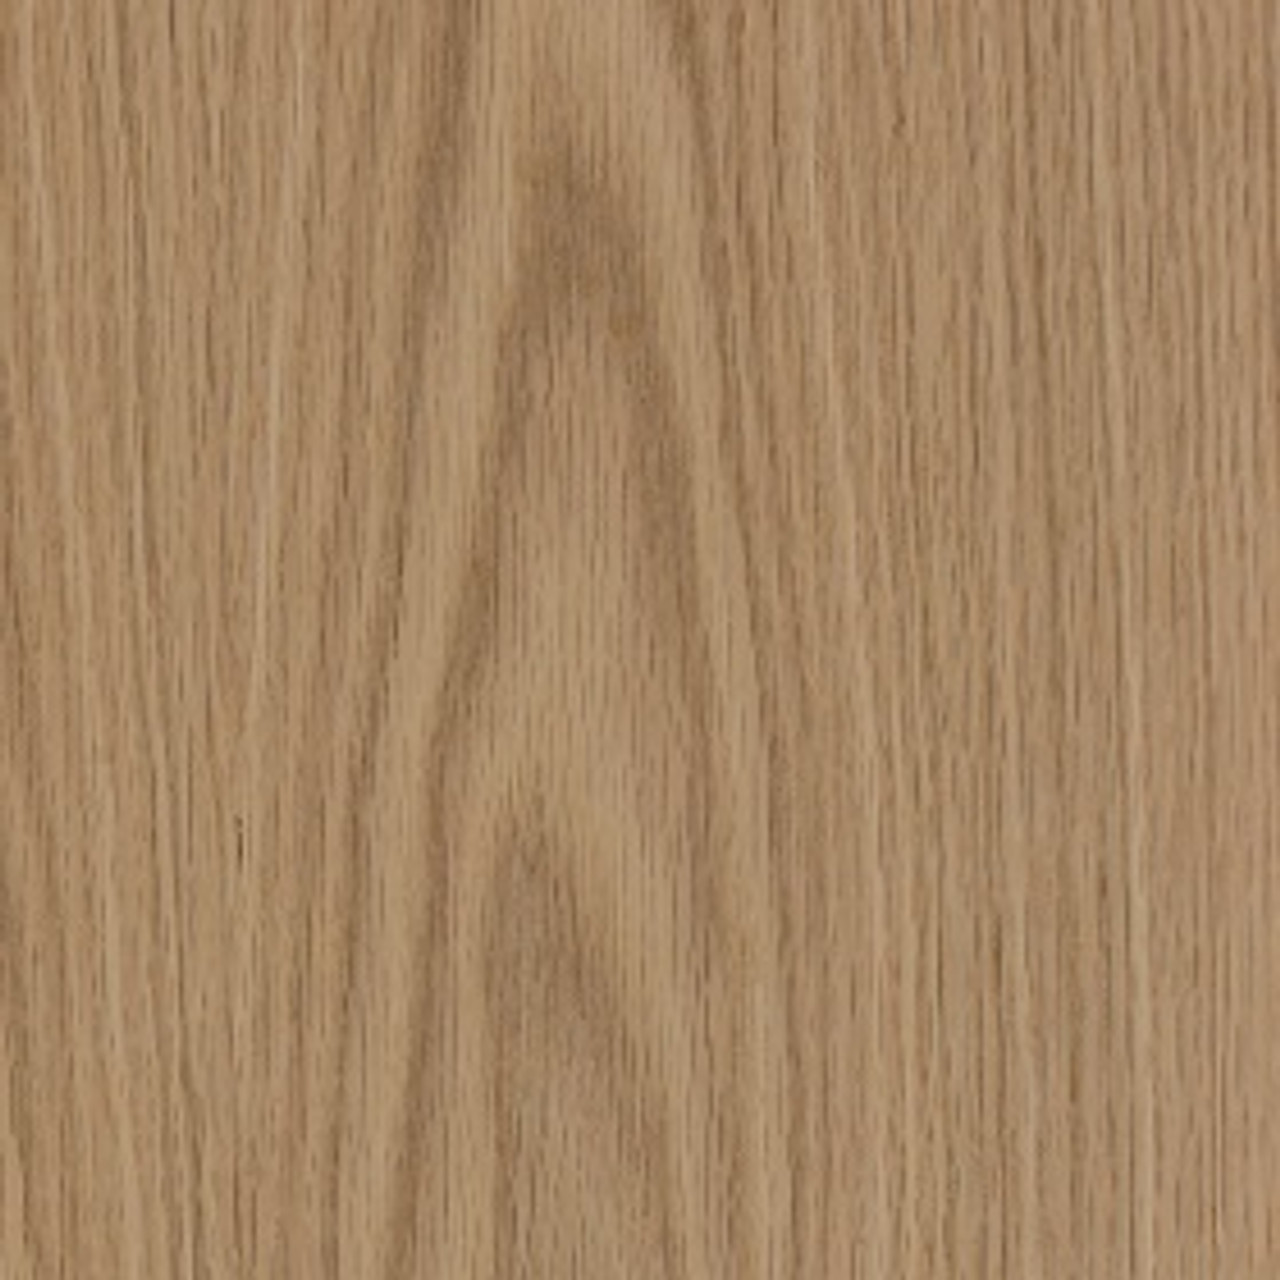 Re Veneering Kitchen Cabinets, Paper Backed PSA Veneer and 2 Ply Wood Backed PSA Veneer For Veneering Kitchen Cabinets